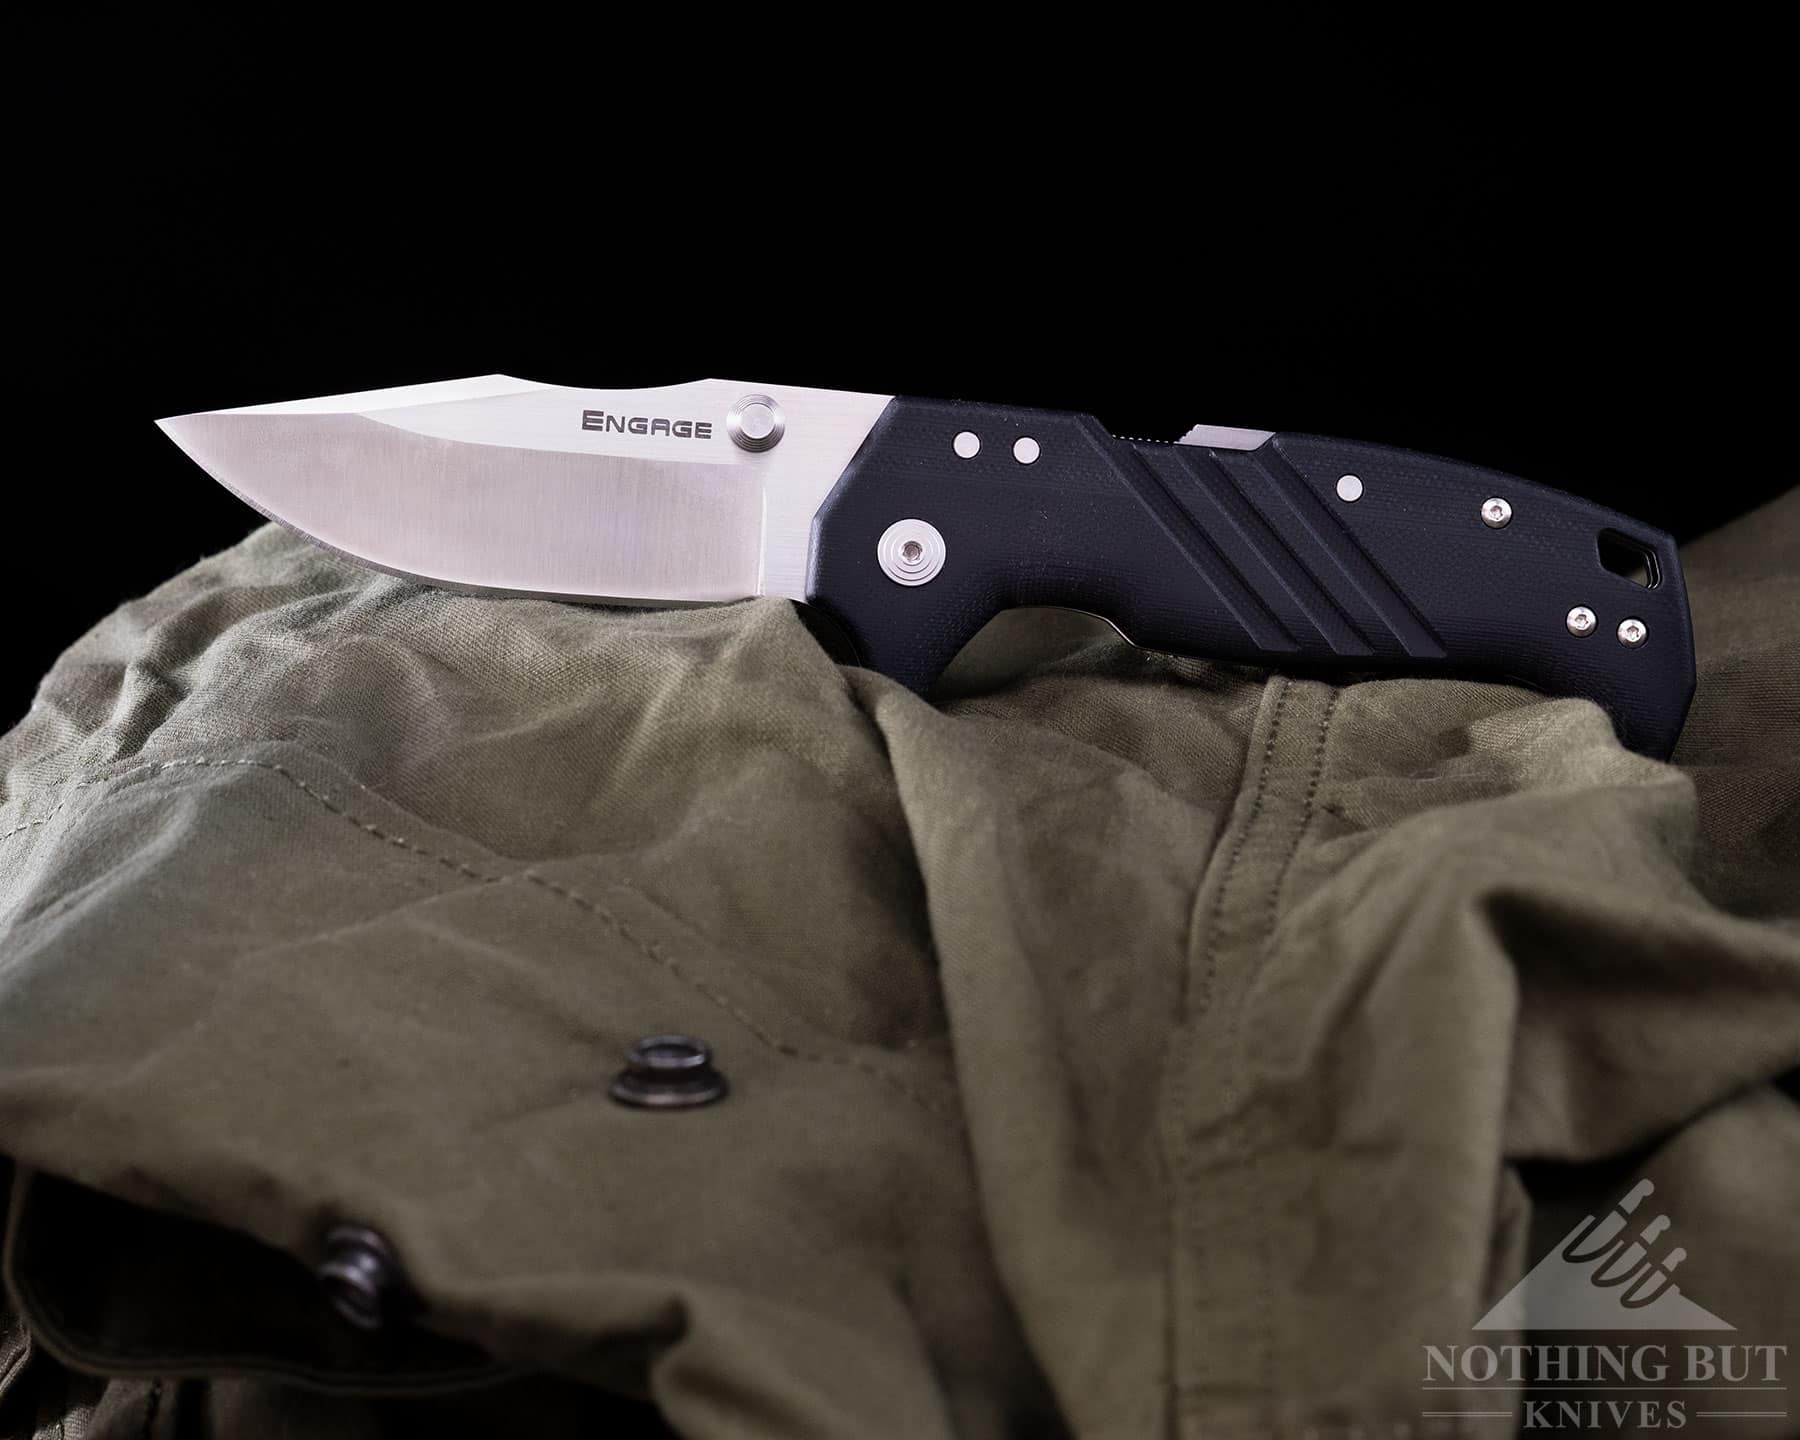 The Cold Steel Engage has good fit and finish which is to be expected of a folding knive at this price point. 